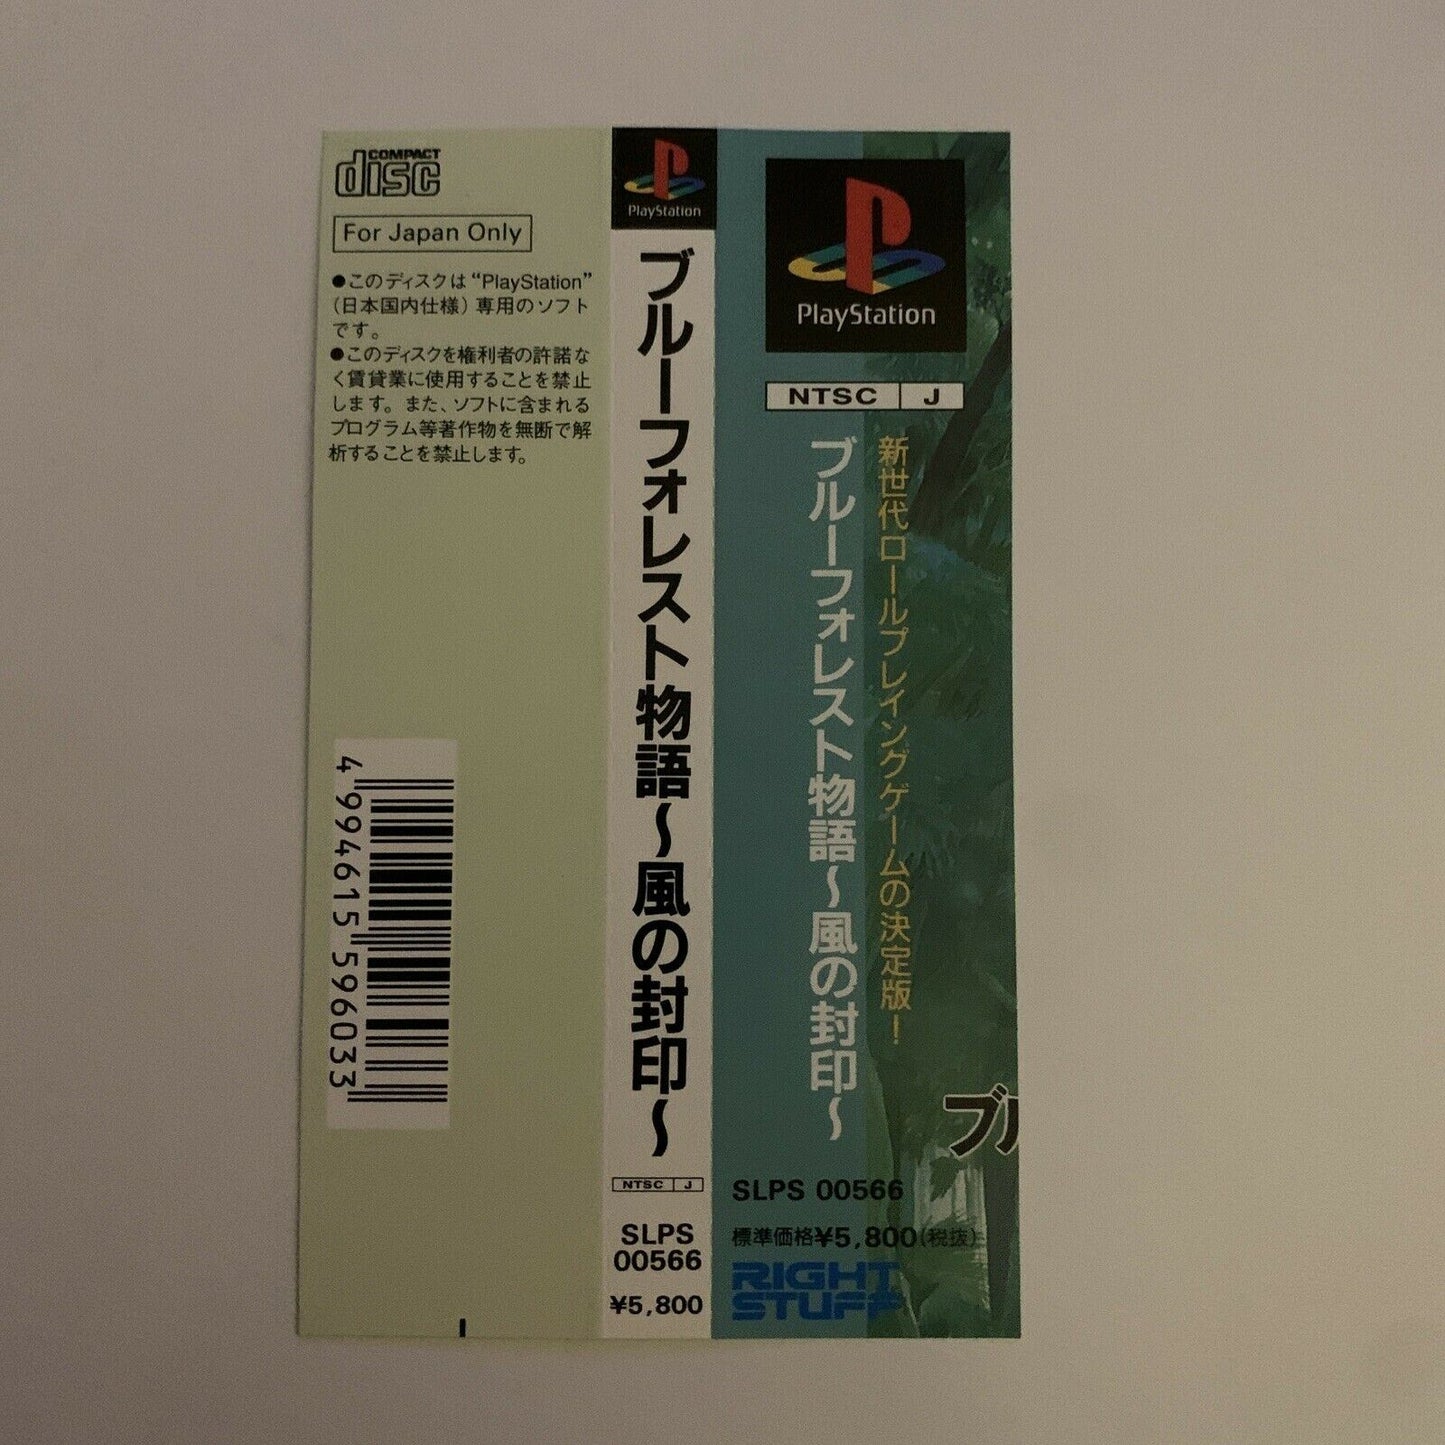 Blue Forest Story - PlayStation PS1 NTSC-J Japan RPG Game 1996